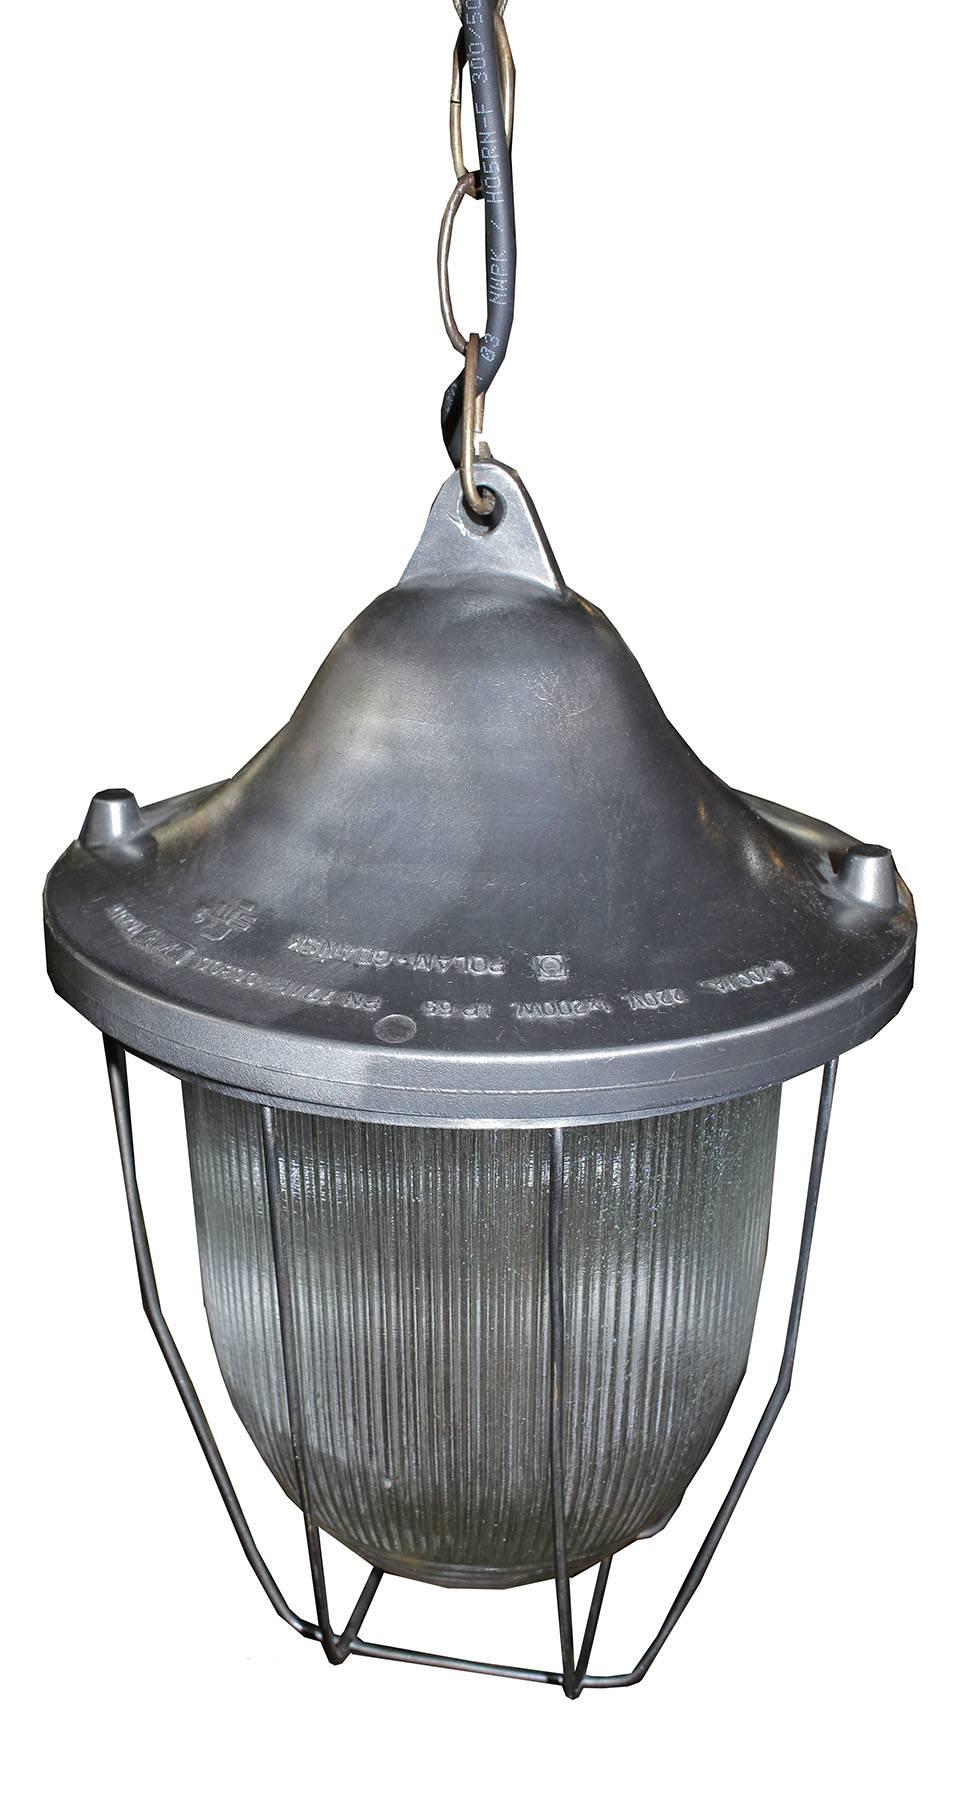 Original antique pendant light. Wonderful ribbed glass and stylish caged lines.
Heavy iron top, stripped and clear coated finish. Functional and stylish, great over and island or in an entryway.